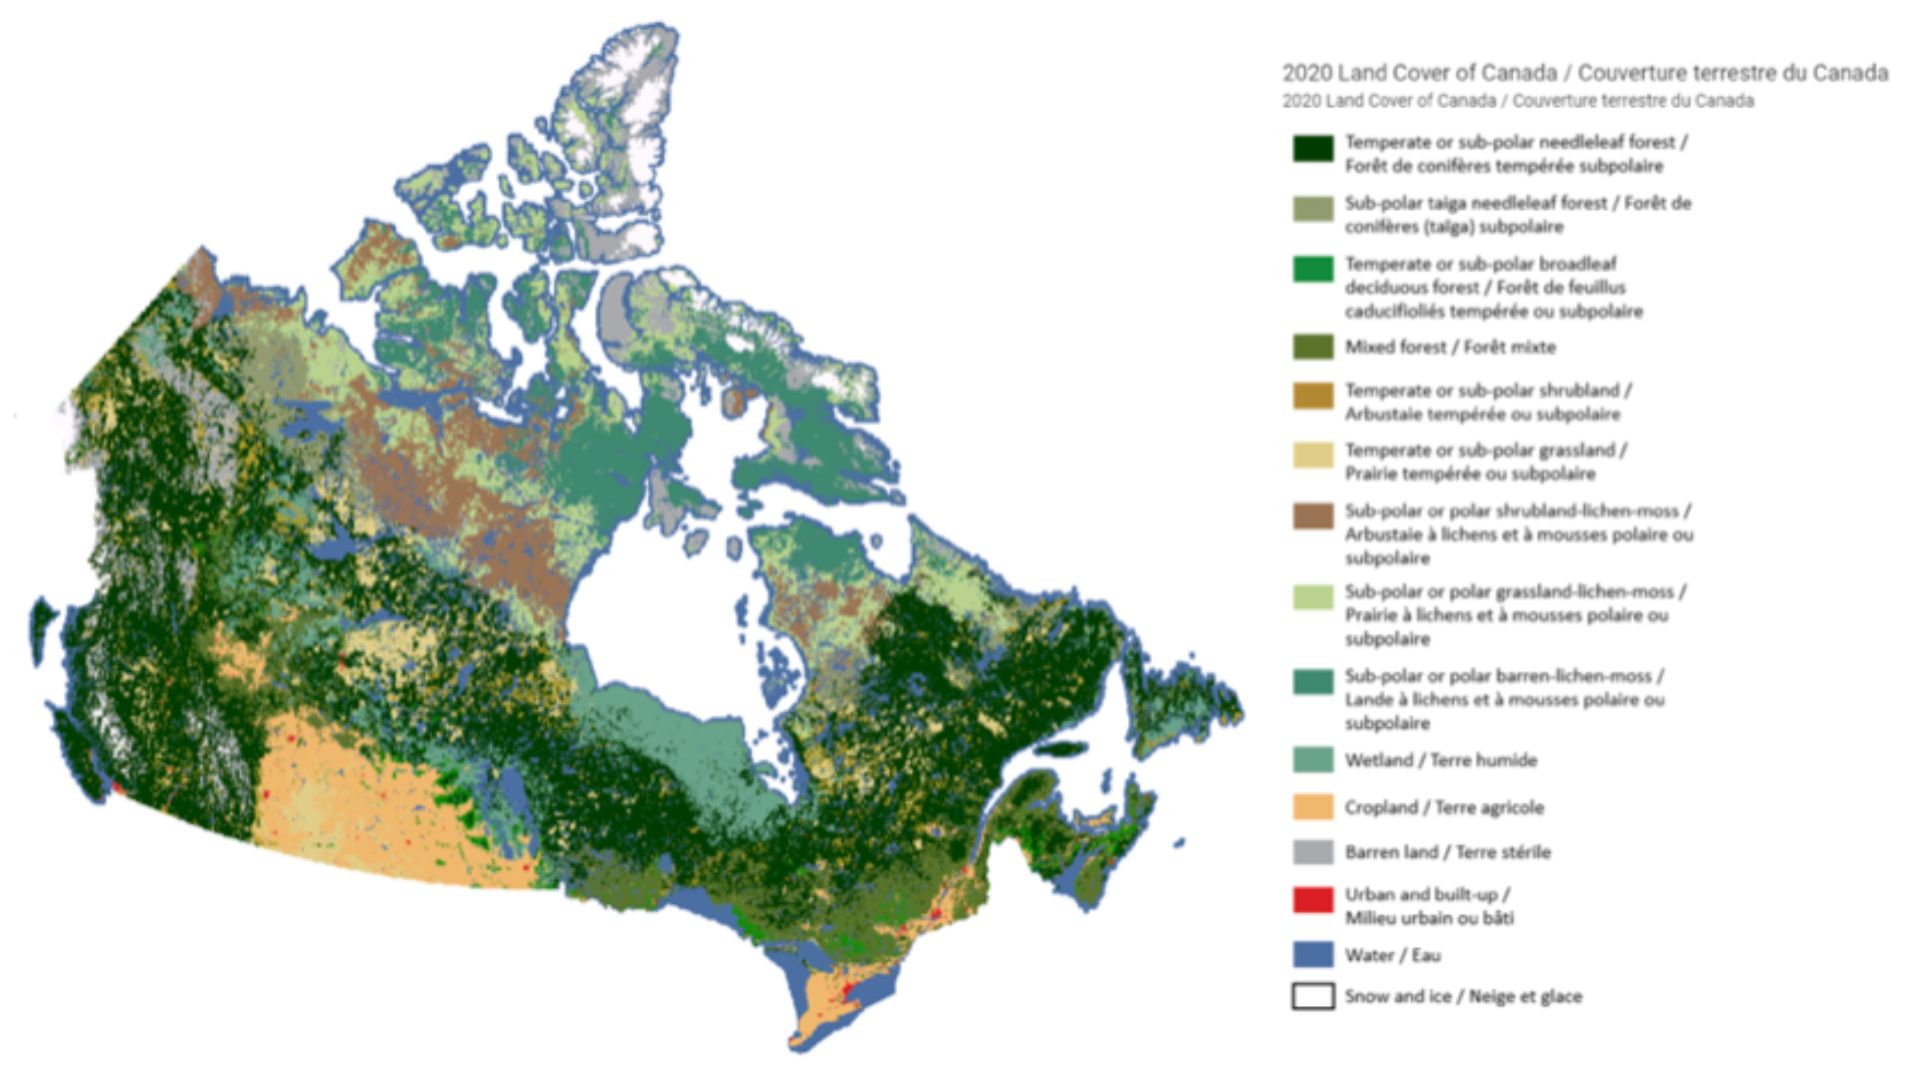 2020 Land Cover of Canada